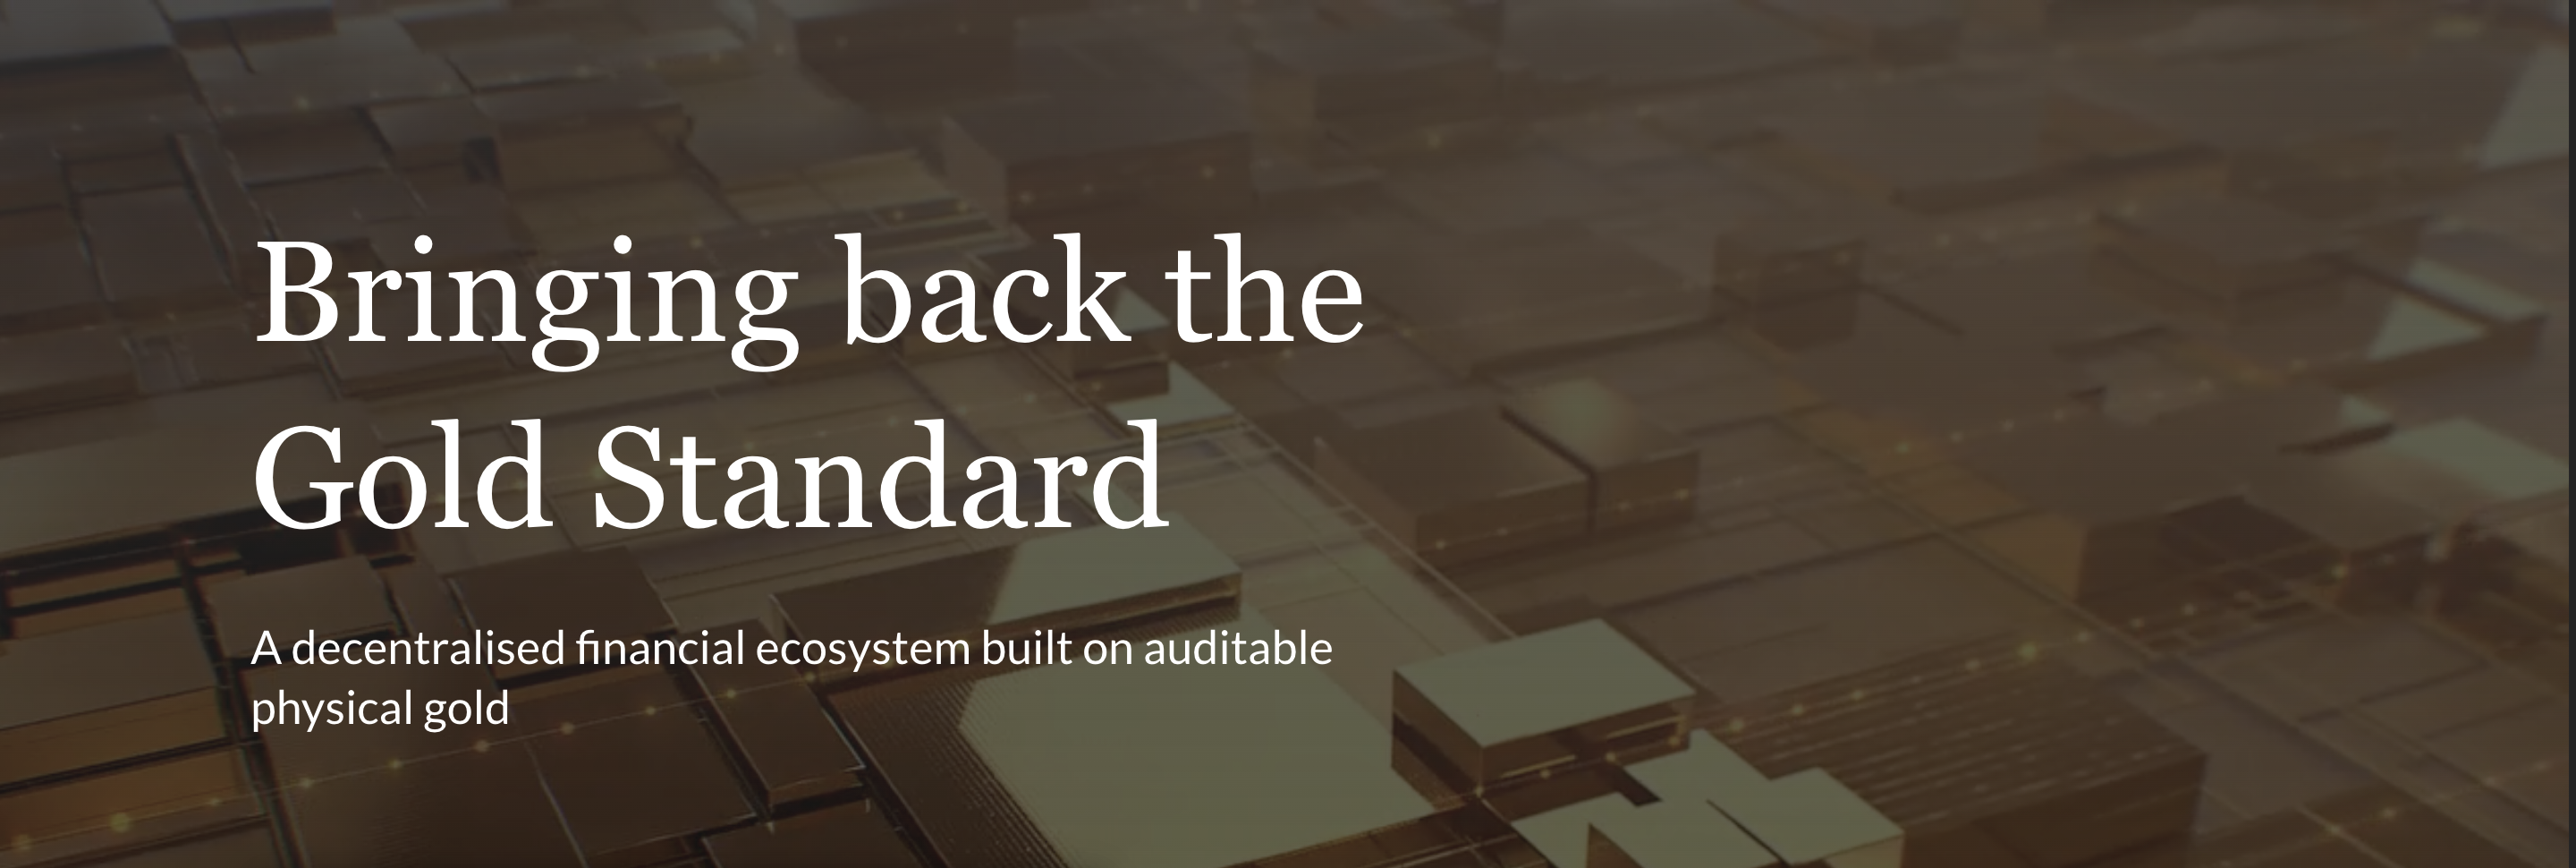 BullionFX: Bringing back the gold standard and conquering milestones 